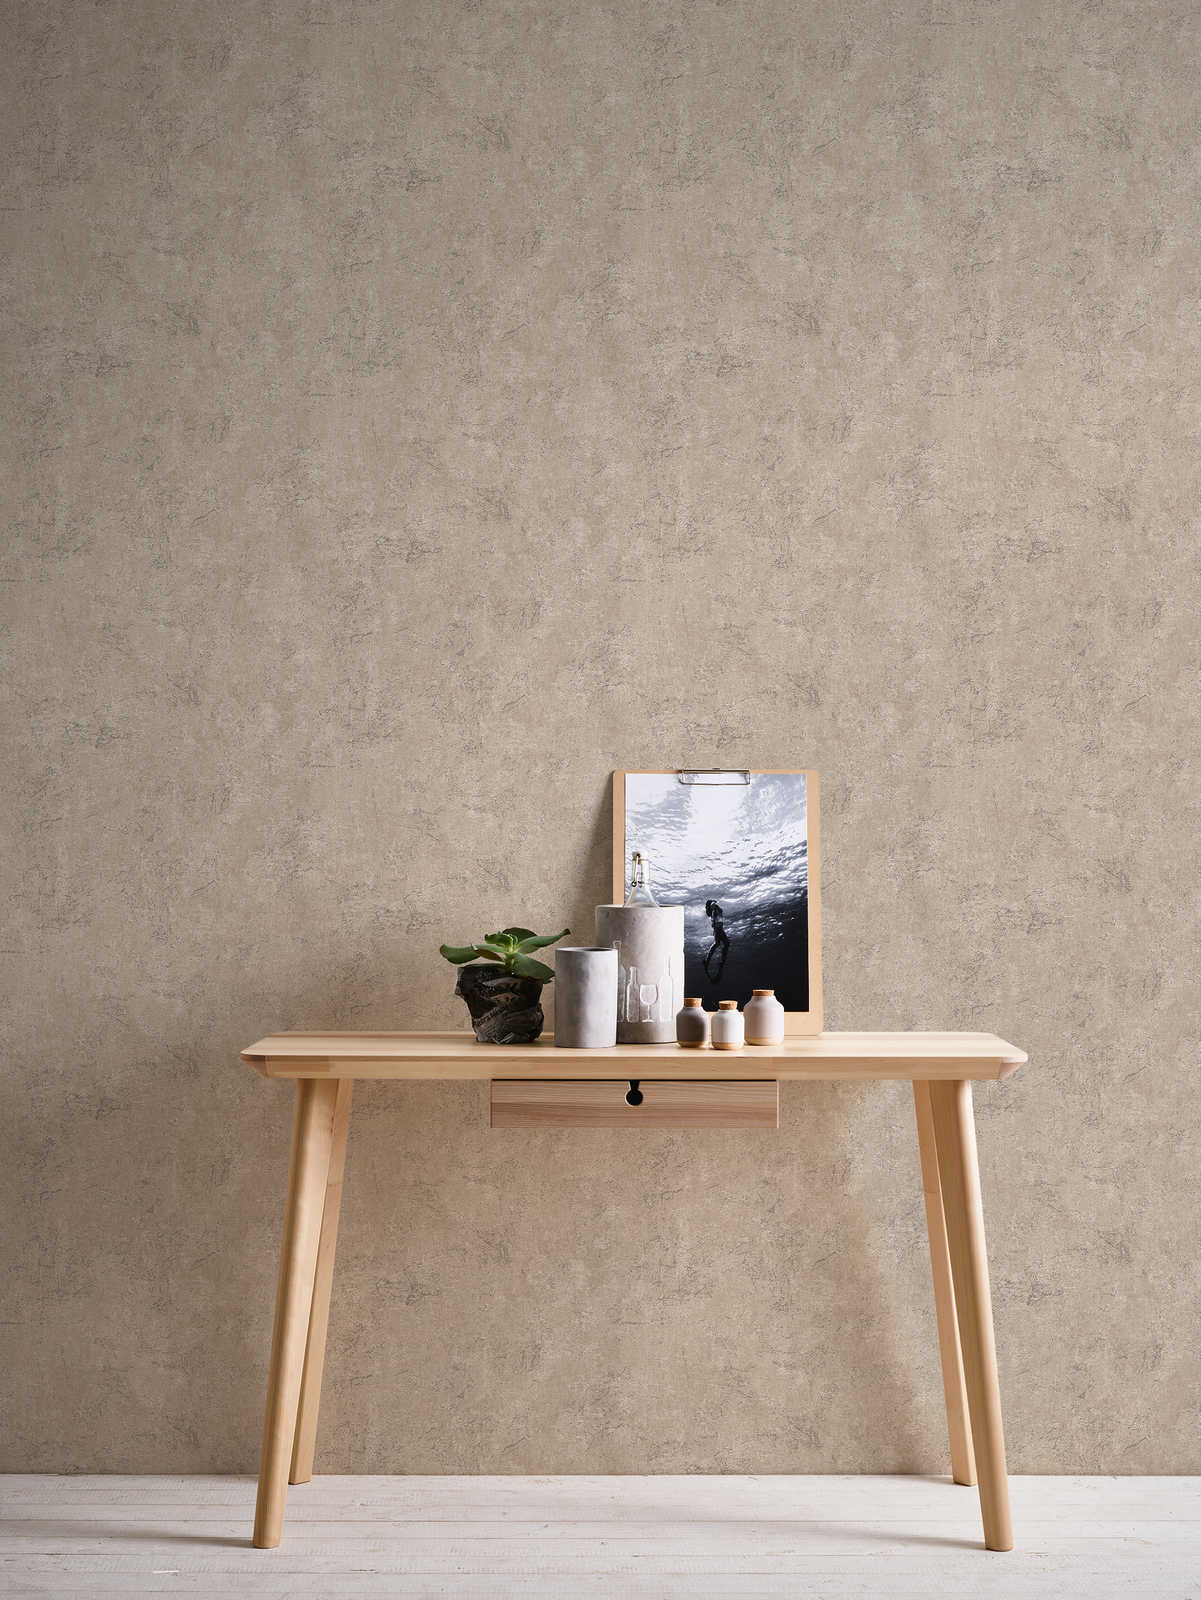             Wallpaper stone look with marbled surface
        